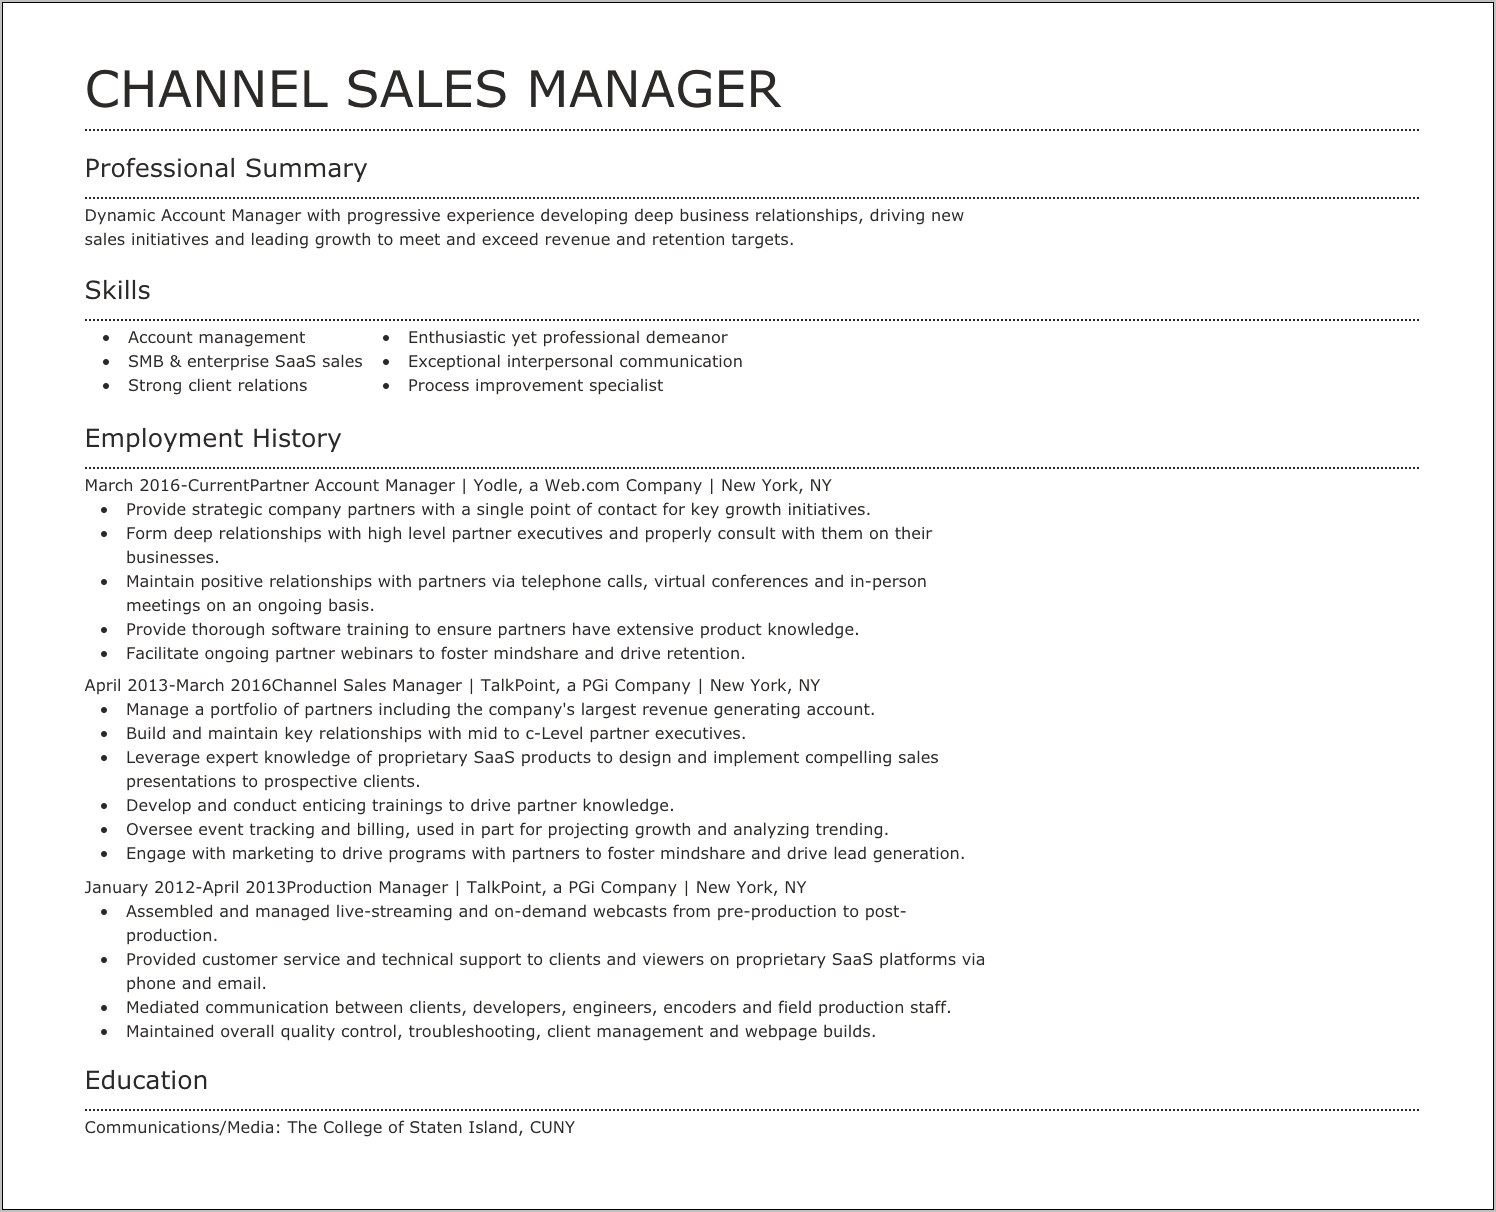 Sales Account Manager Resume Summary